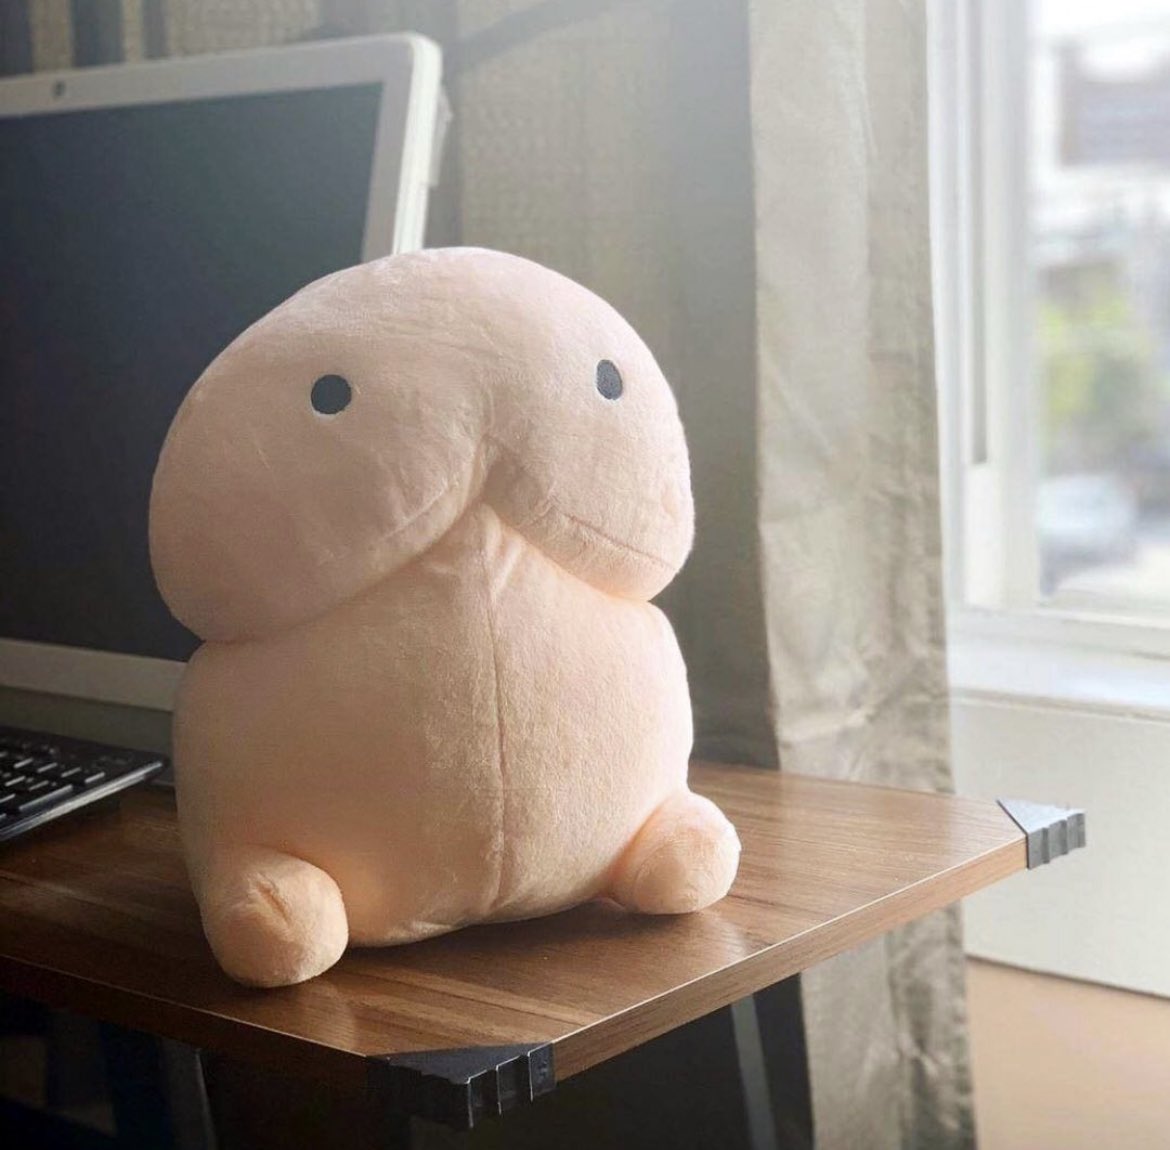 Ok y’all go get this plushie it’s cute!!!!  https://squishplushies.com/products/peepee-plushie